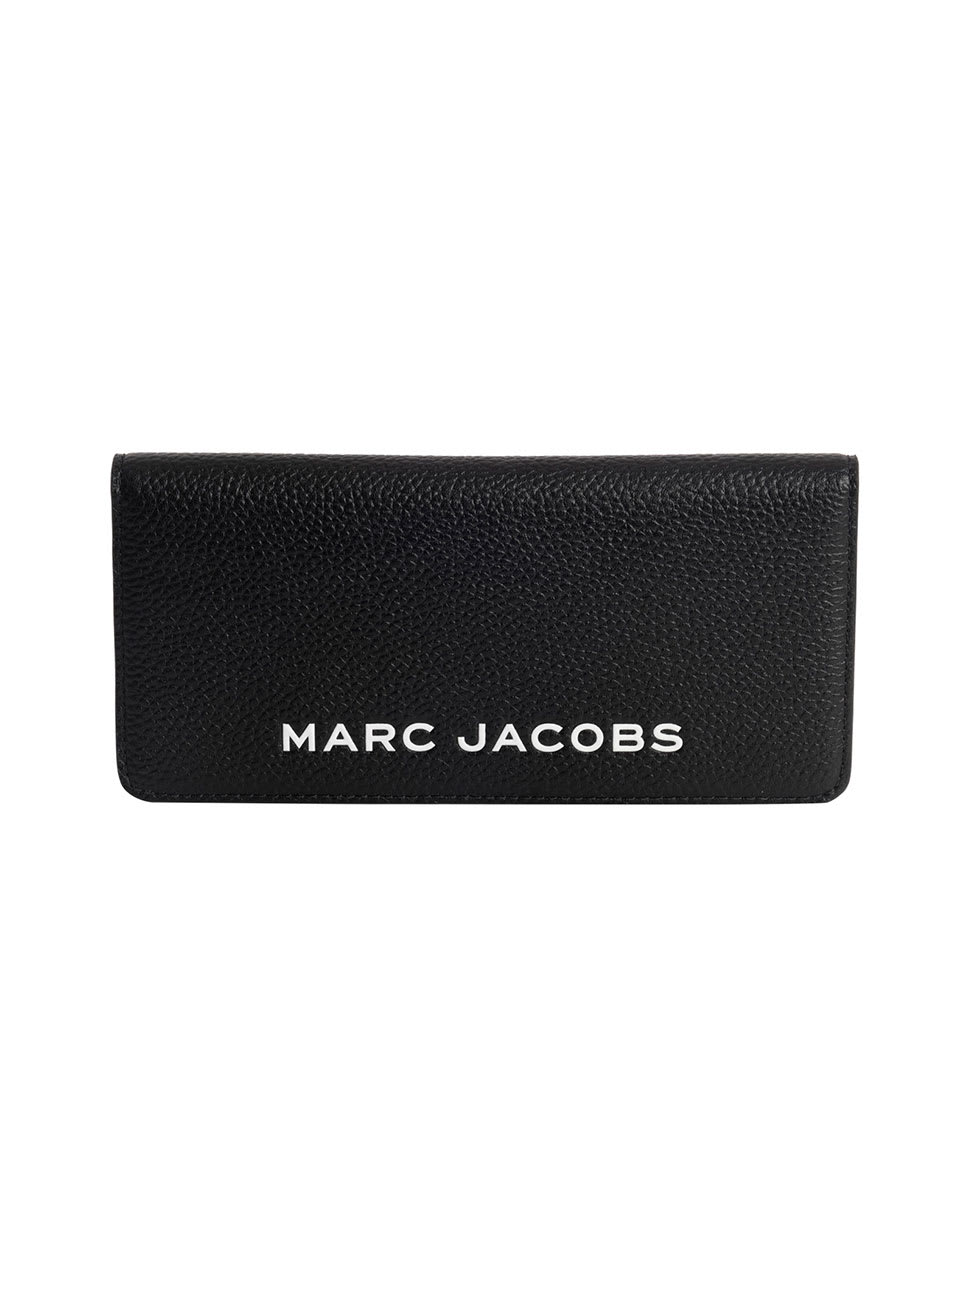 Marc Jacobs Bold Open Face Wallet